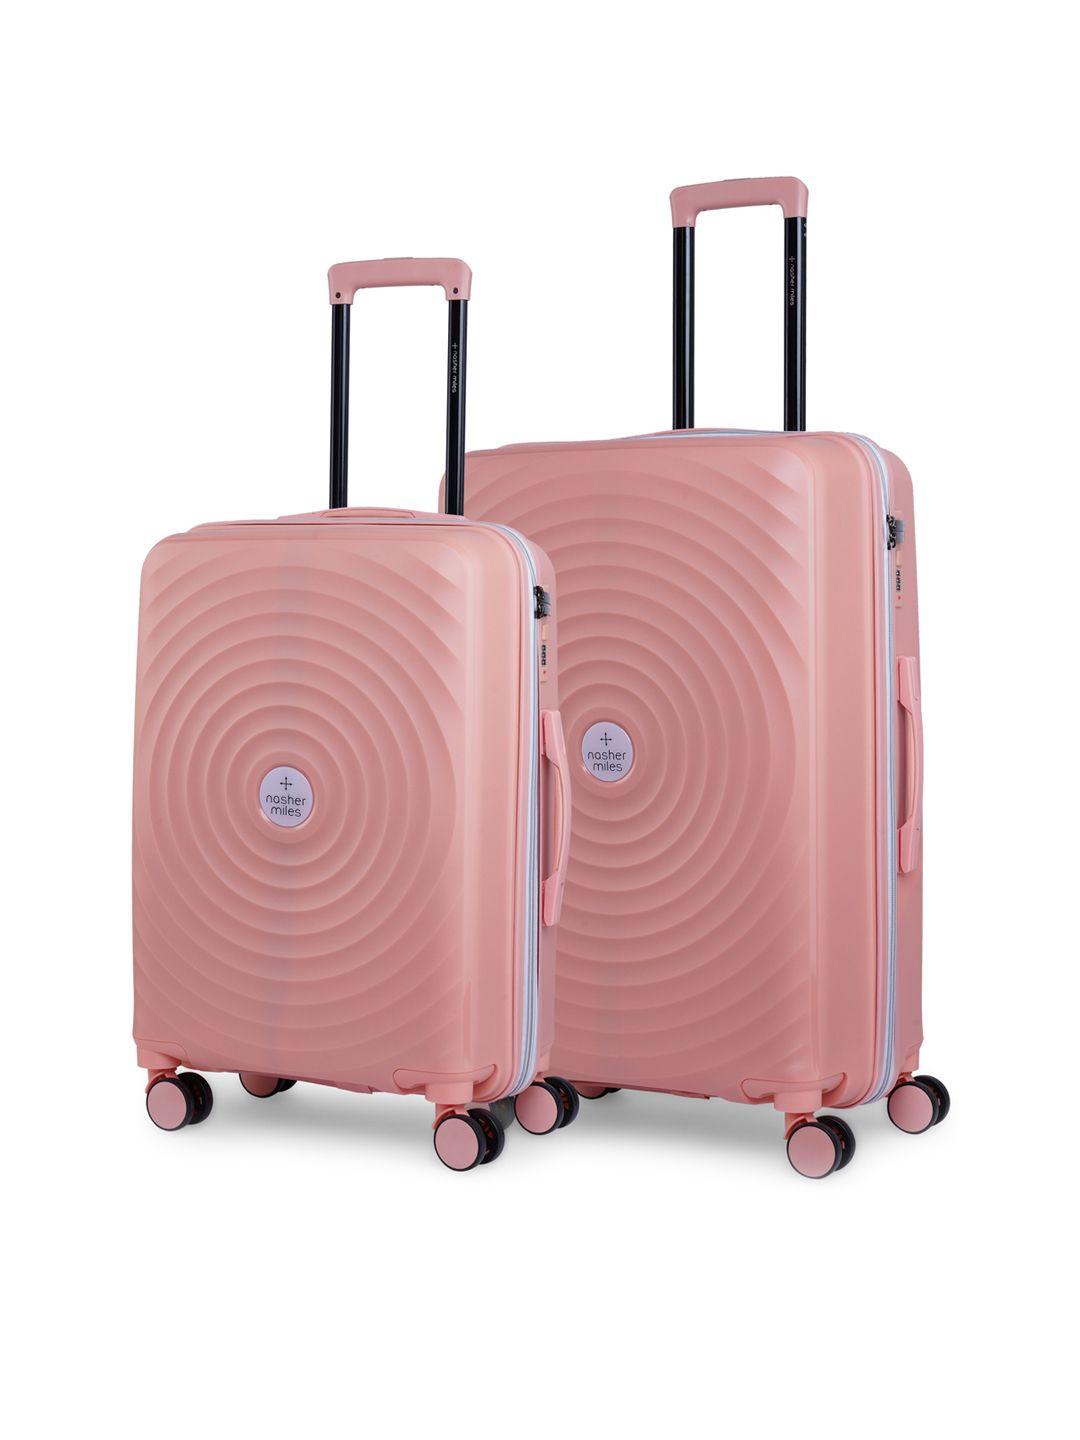 nasher miles set of 2 peach texture hard-sided trolley bag